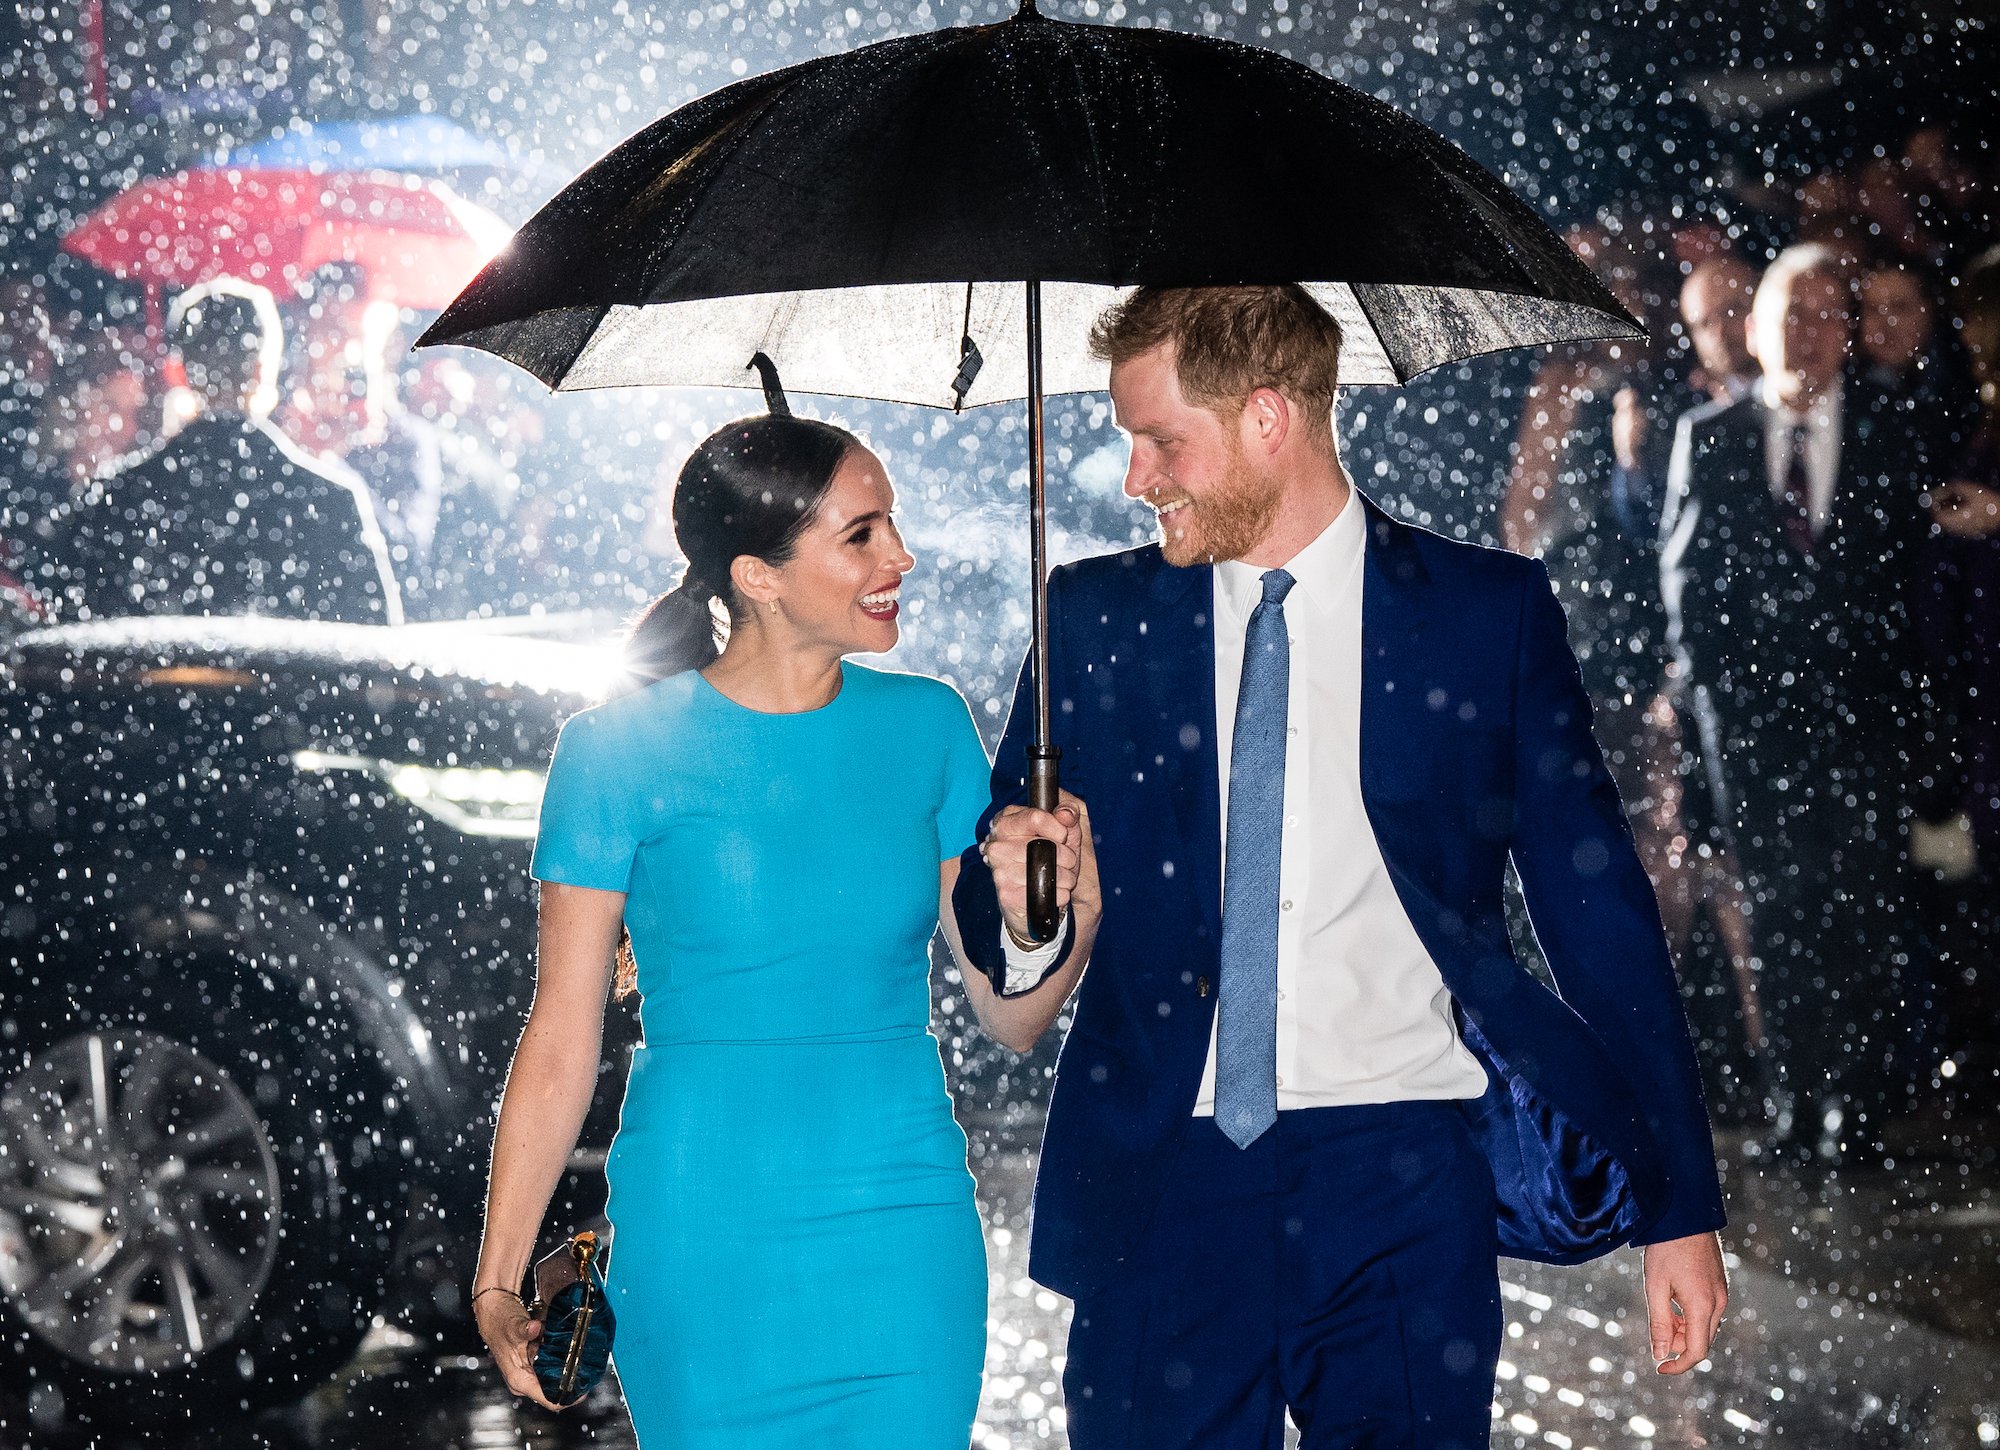 (L-R) Meghan Markle and Prince Harry smiling at each other under and umbrella in the rain